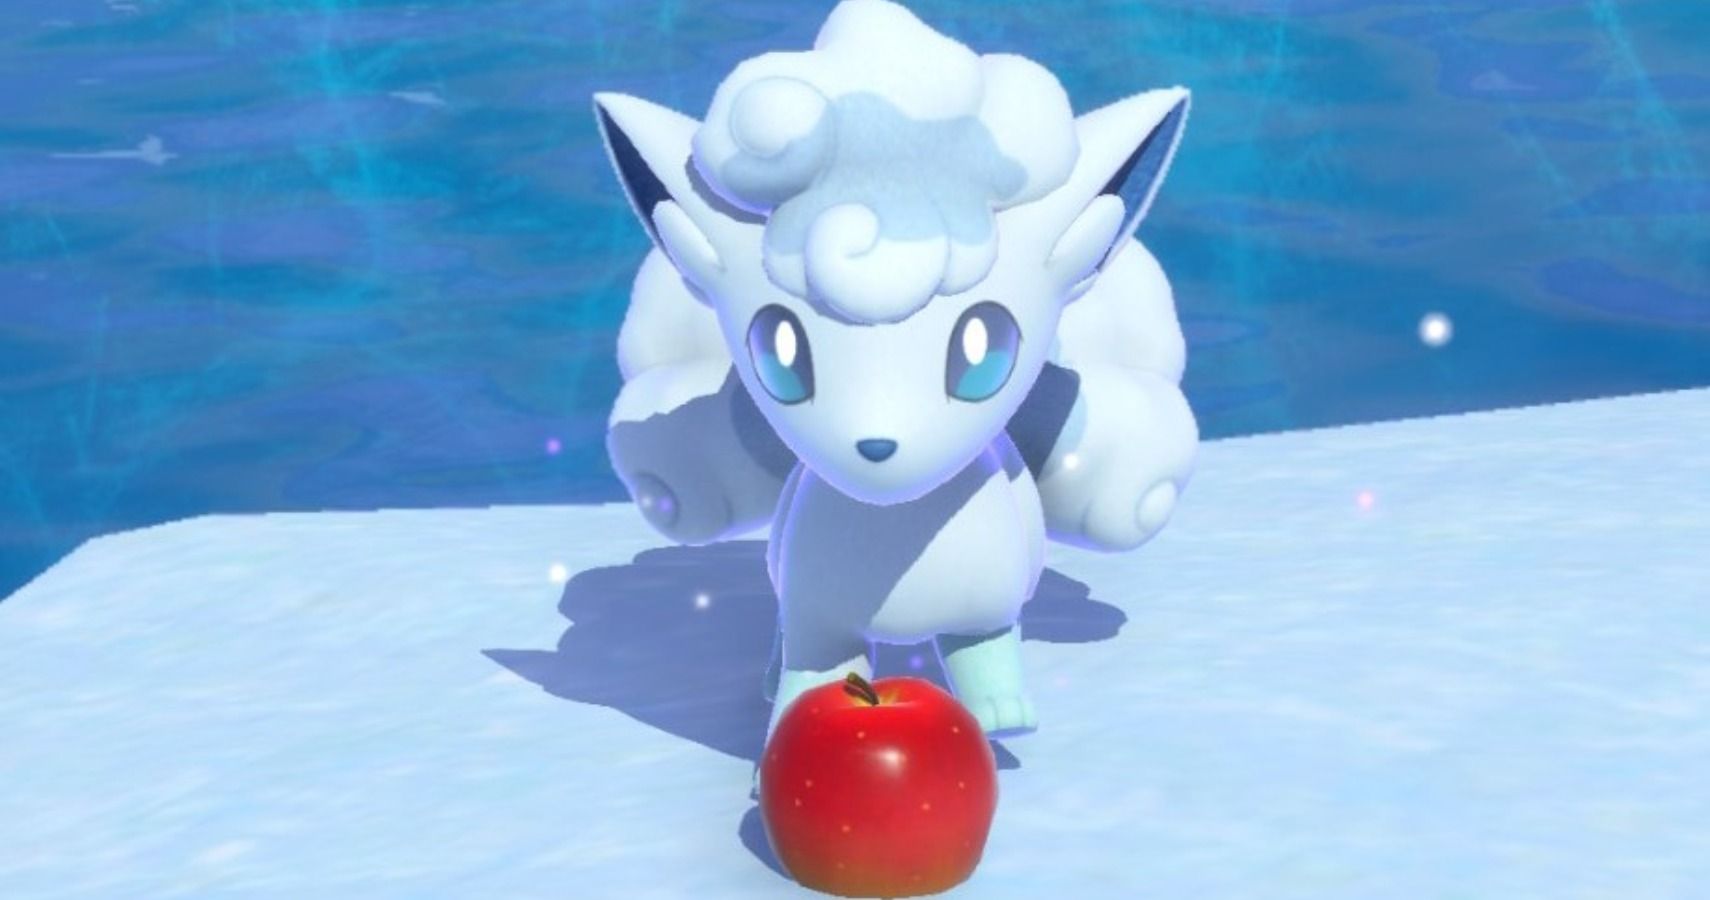 New Pokemon Snap 12 Update Breakdown And Patch Notes  Proud Warrior Request Finally Fixed